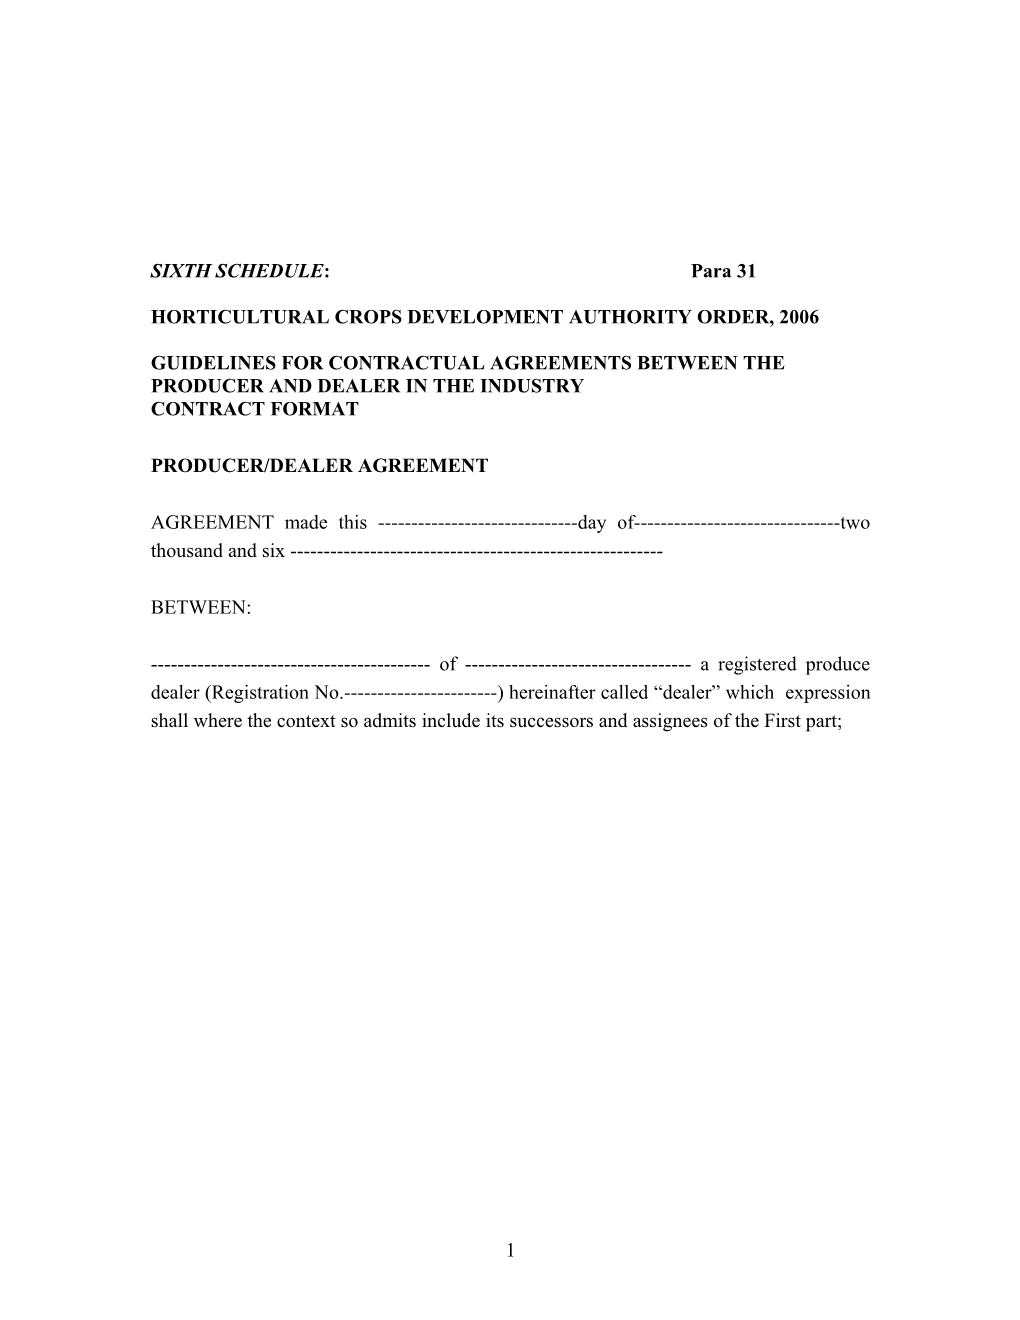 Horticultural Crops Development Authority Order, 2006